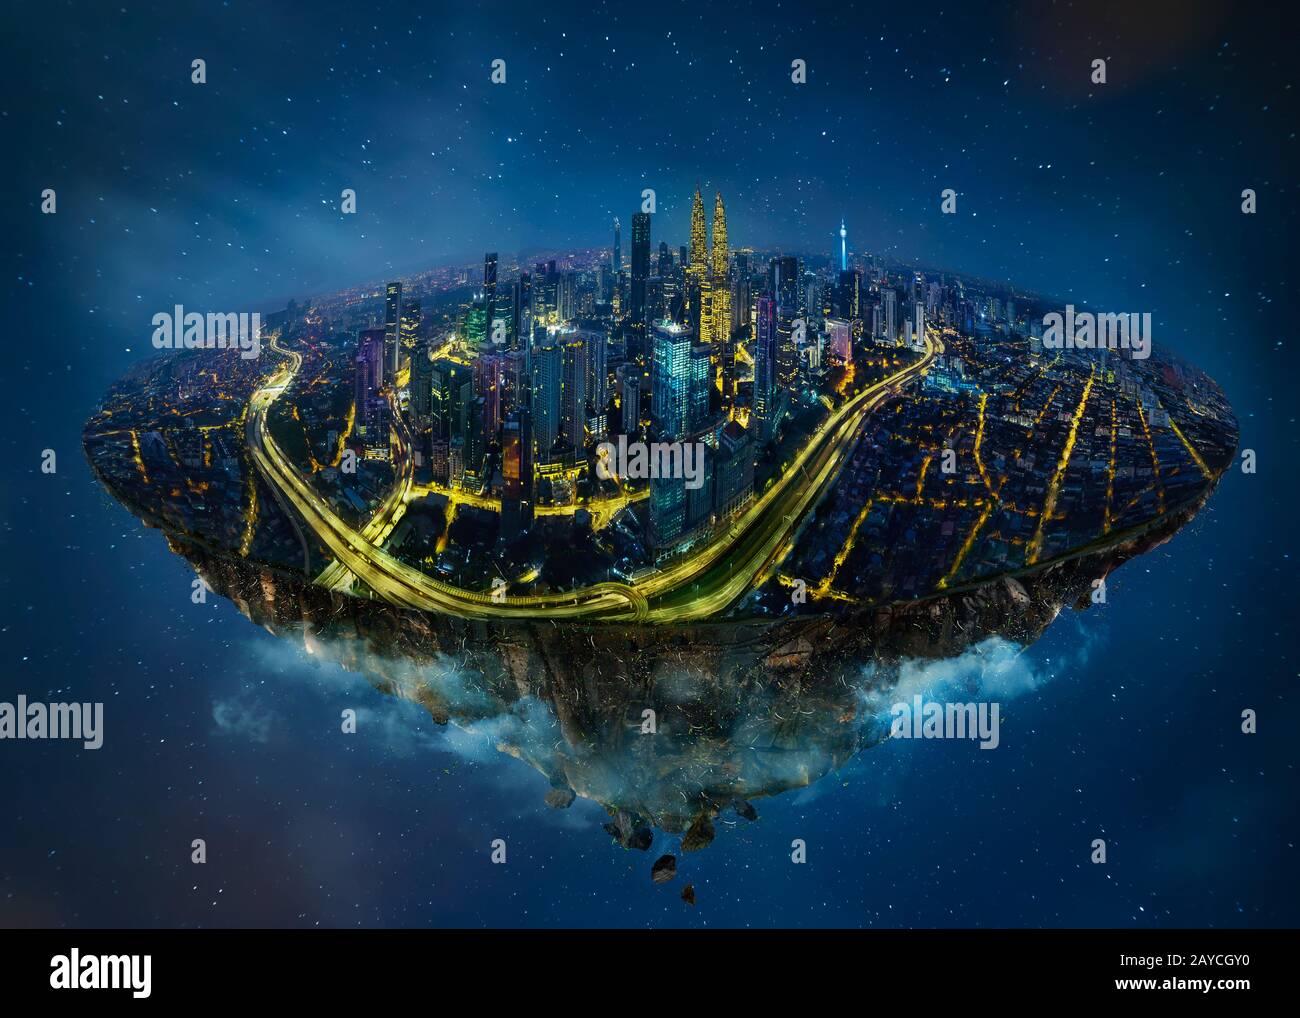 Fantasy island floating in the air with modern city skyline Stock Photo